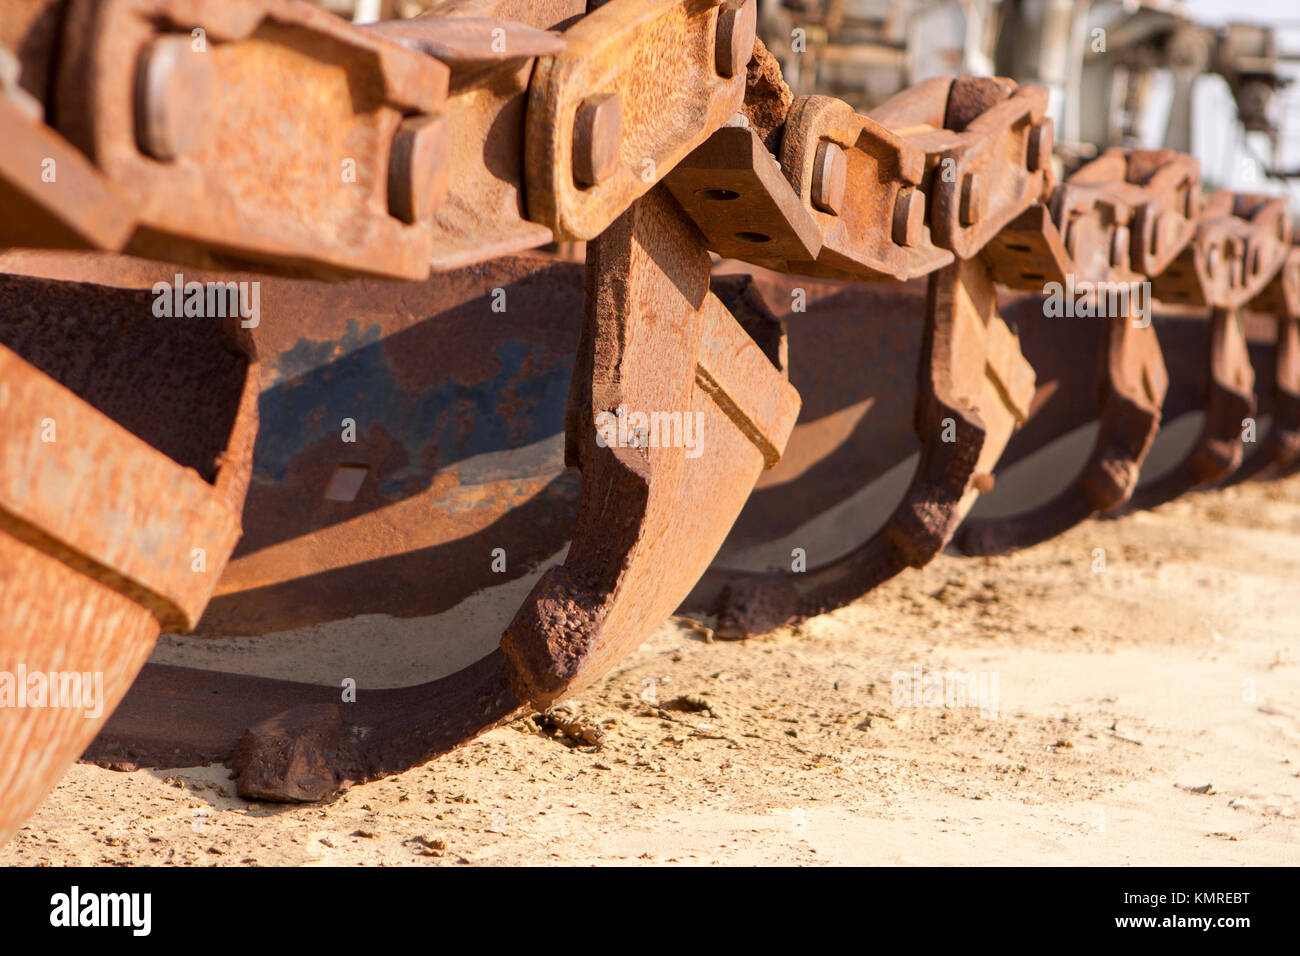 rusted buckets from giant career shovel Stock Photo